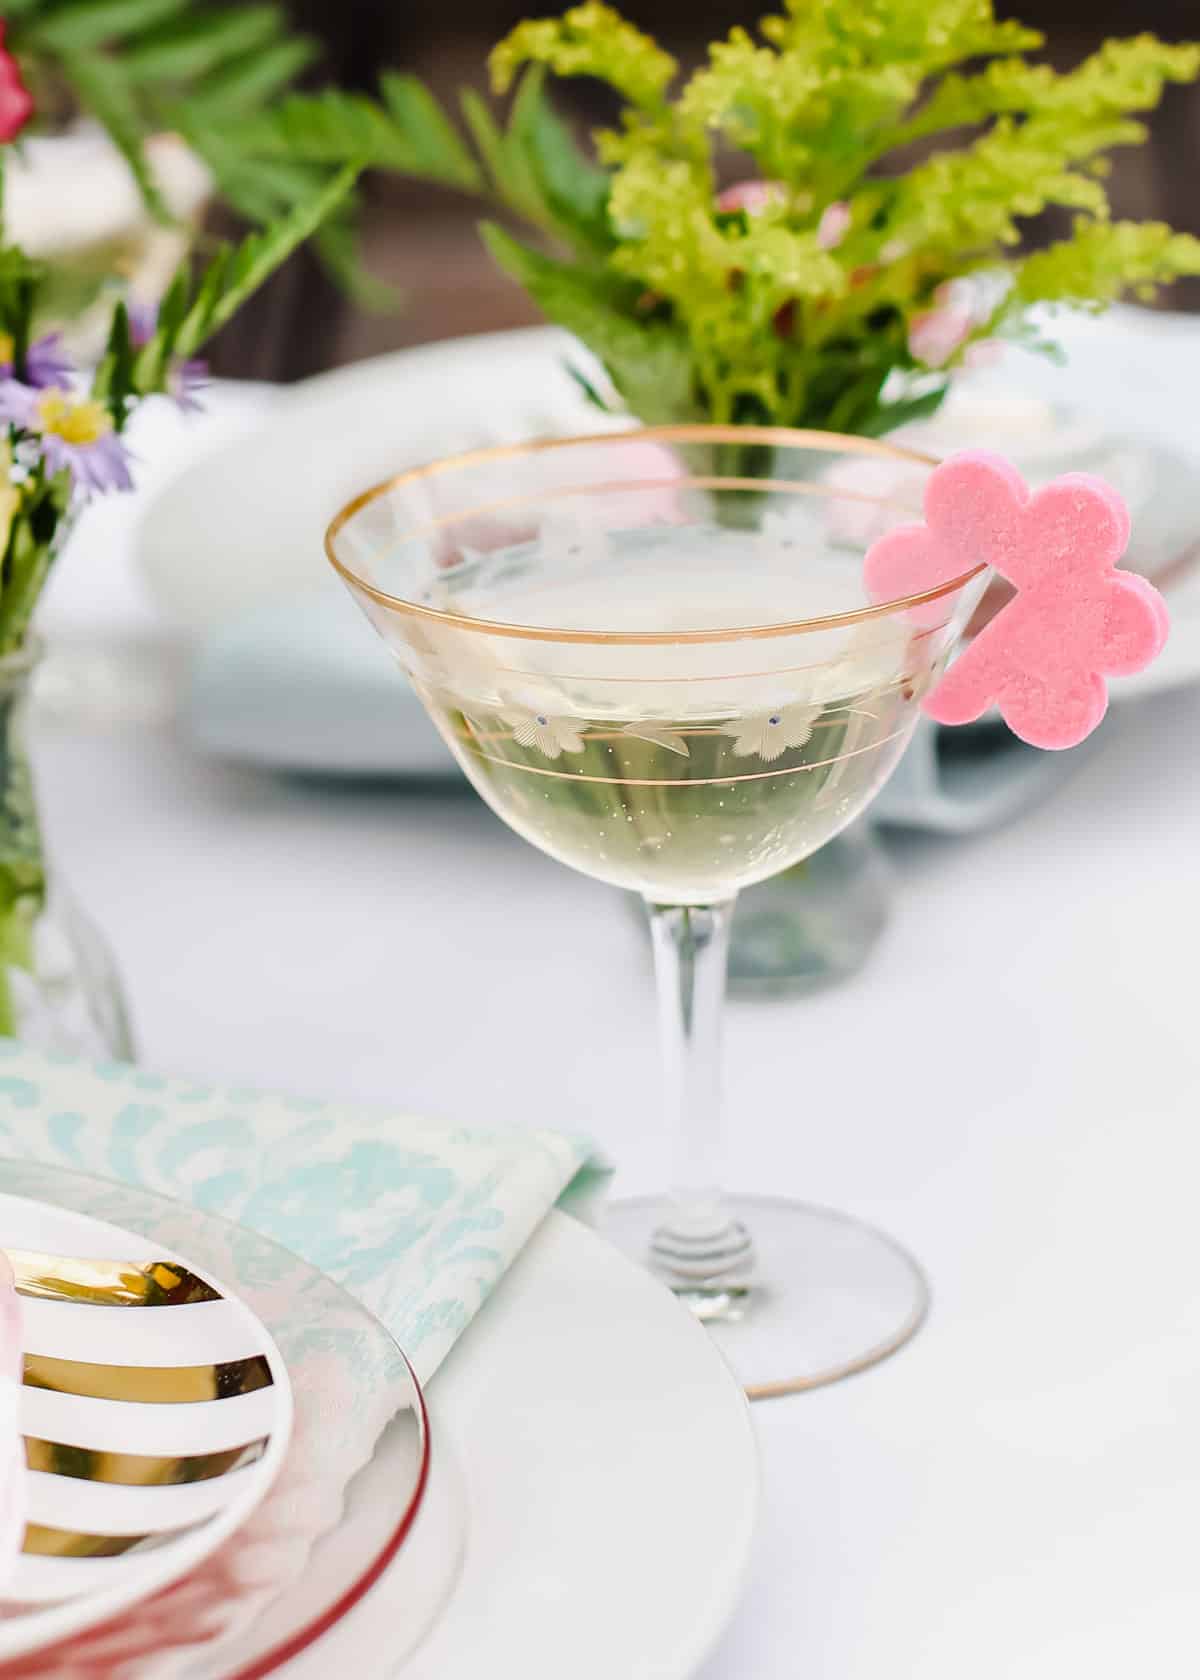 champagne in vintage coupe glass with flower shaped sugar cube hanging on side.